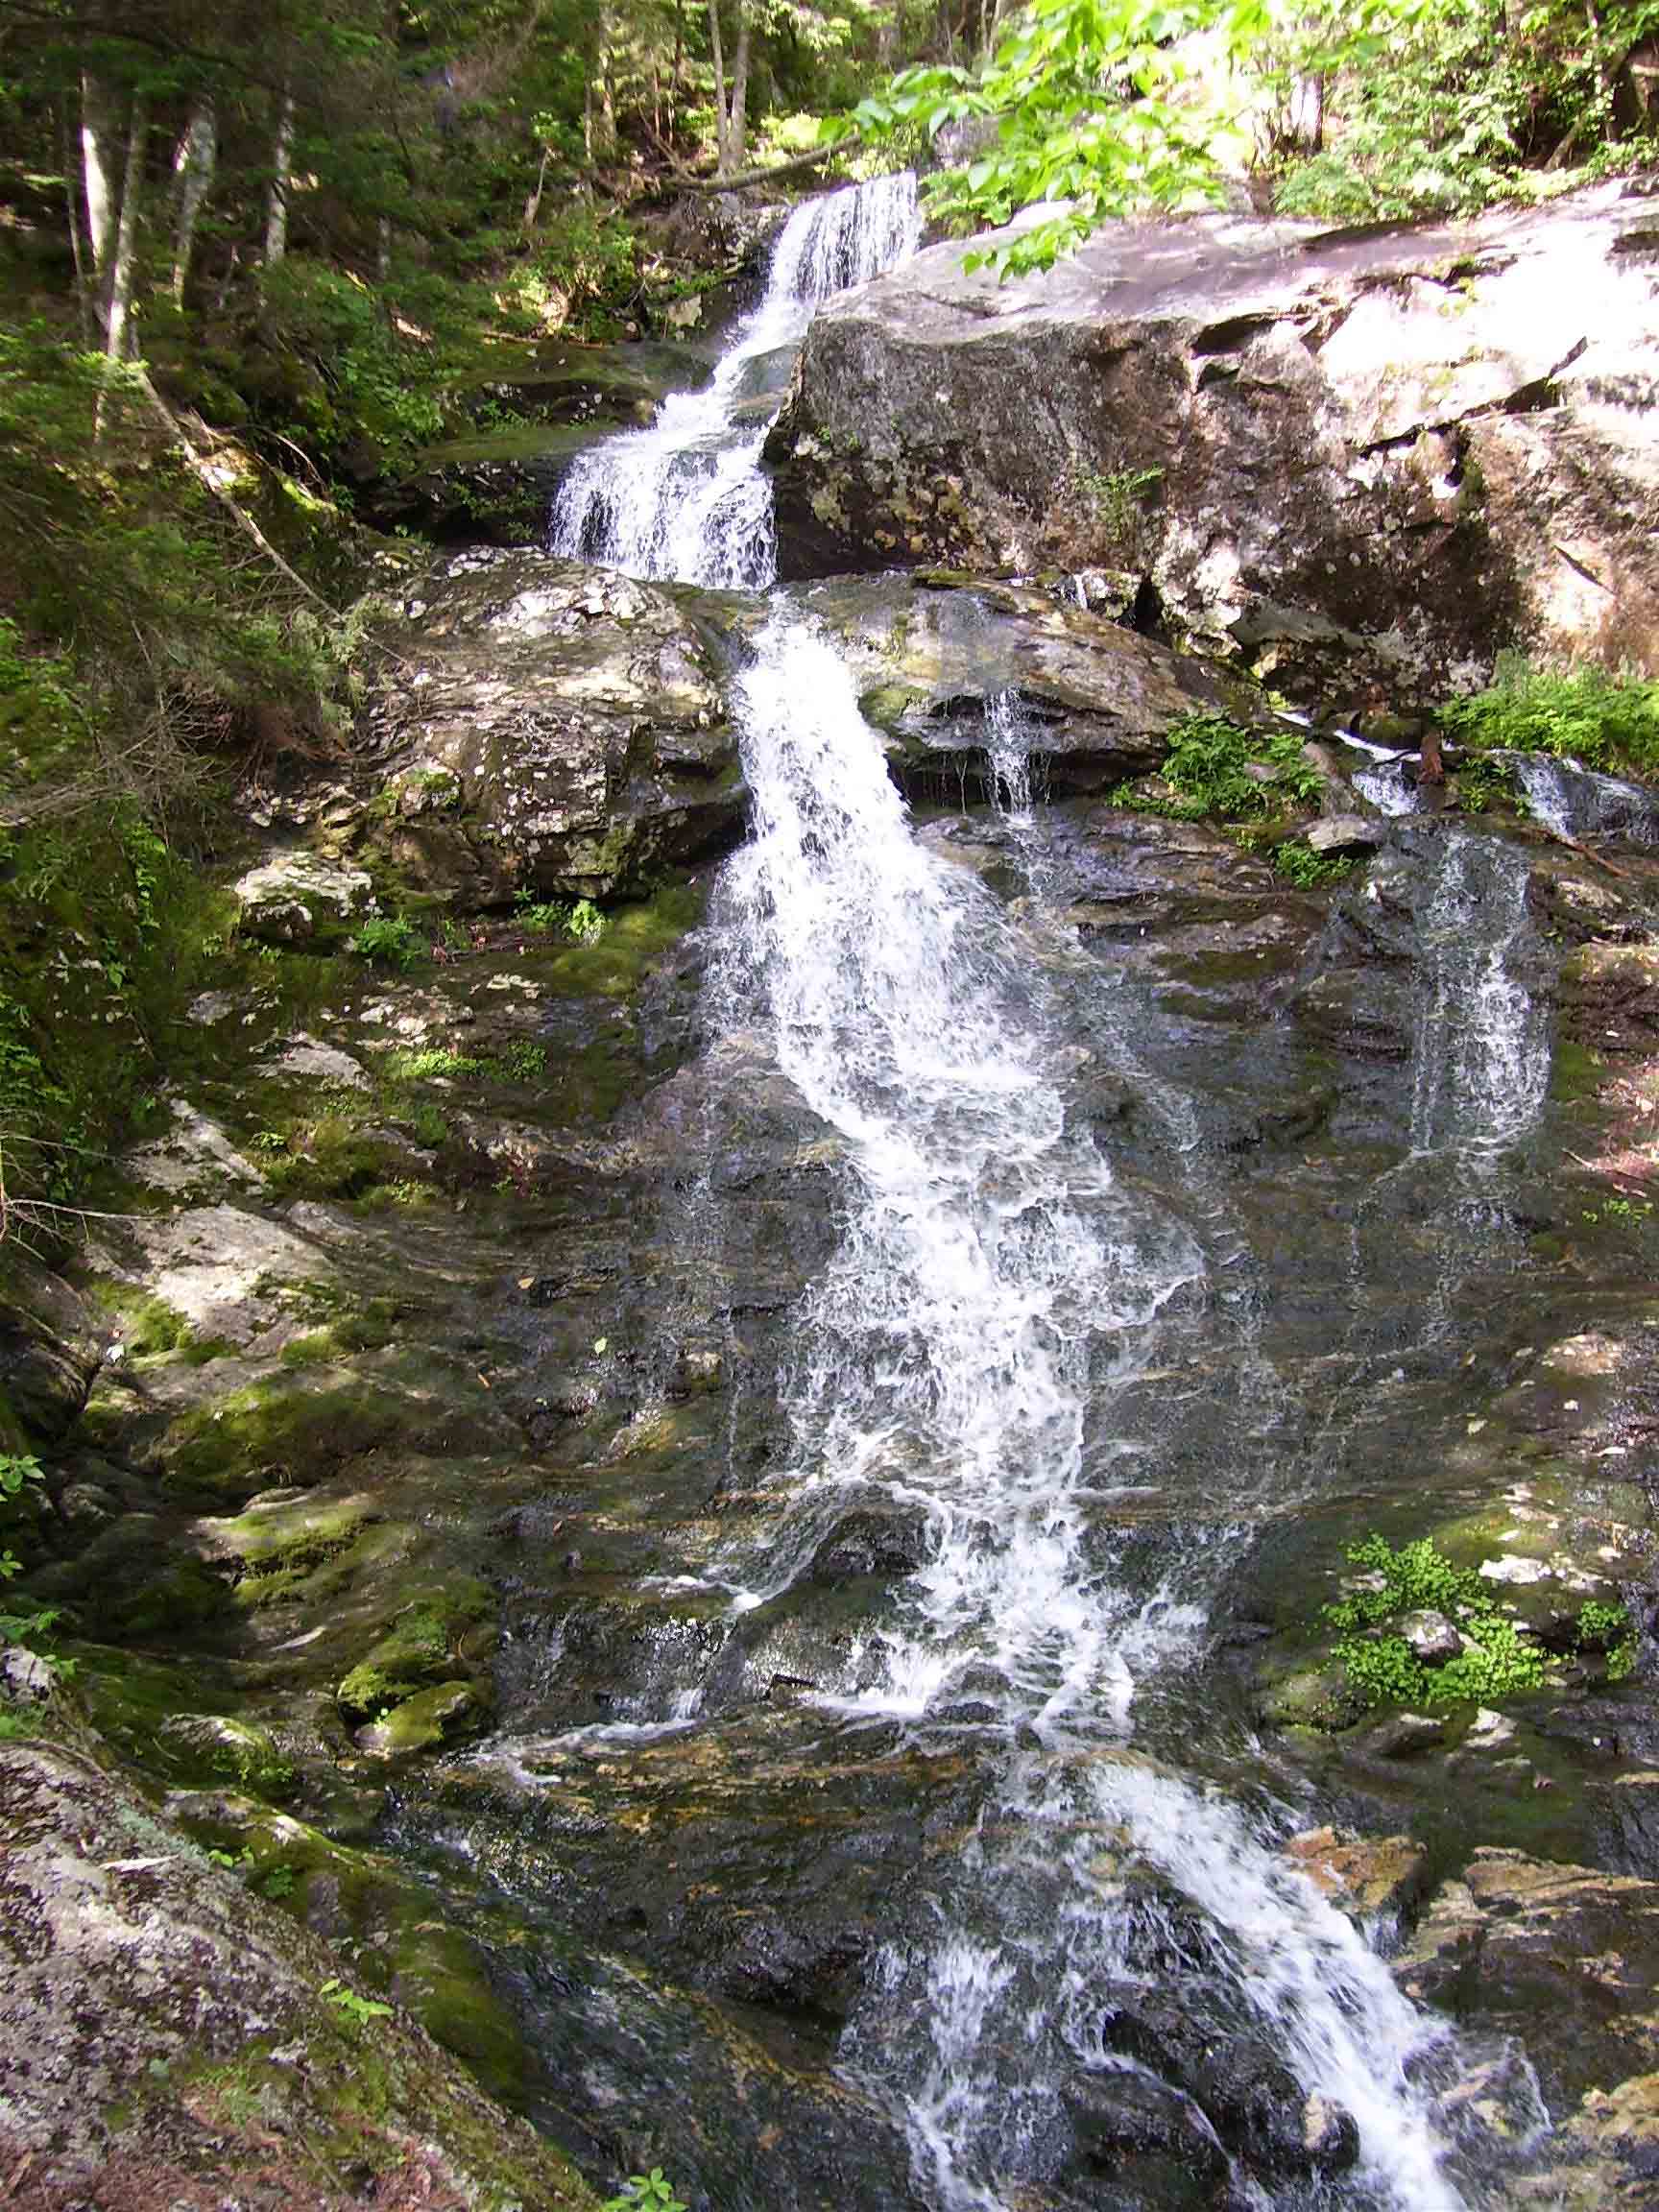 Another view of the first cascade reached on the Beaverbrook Trail (part of AT) when climbing southbound from Kinsman Notch.  Courtesy dlcul@conncoll.edu